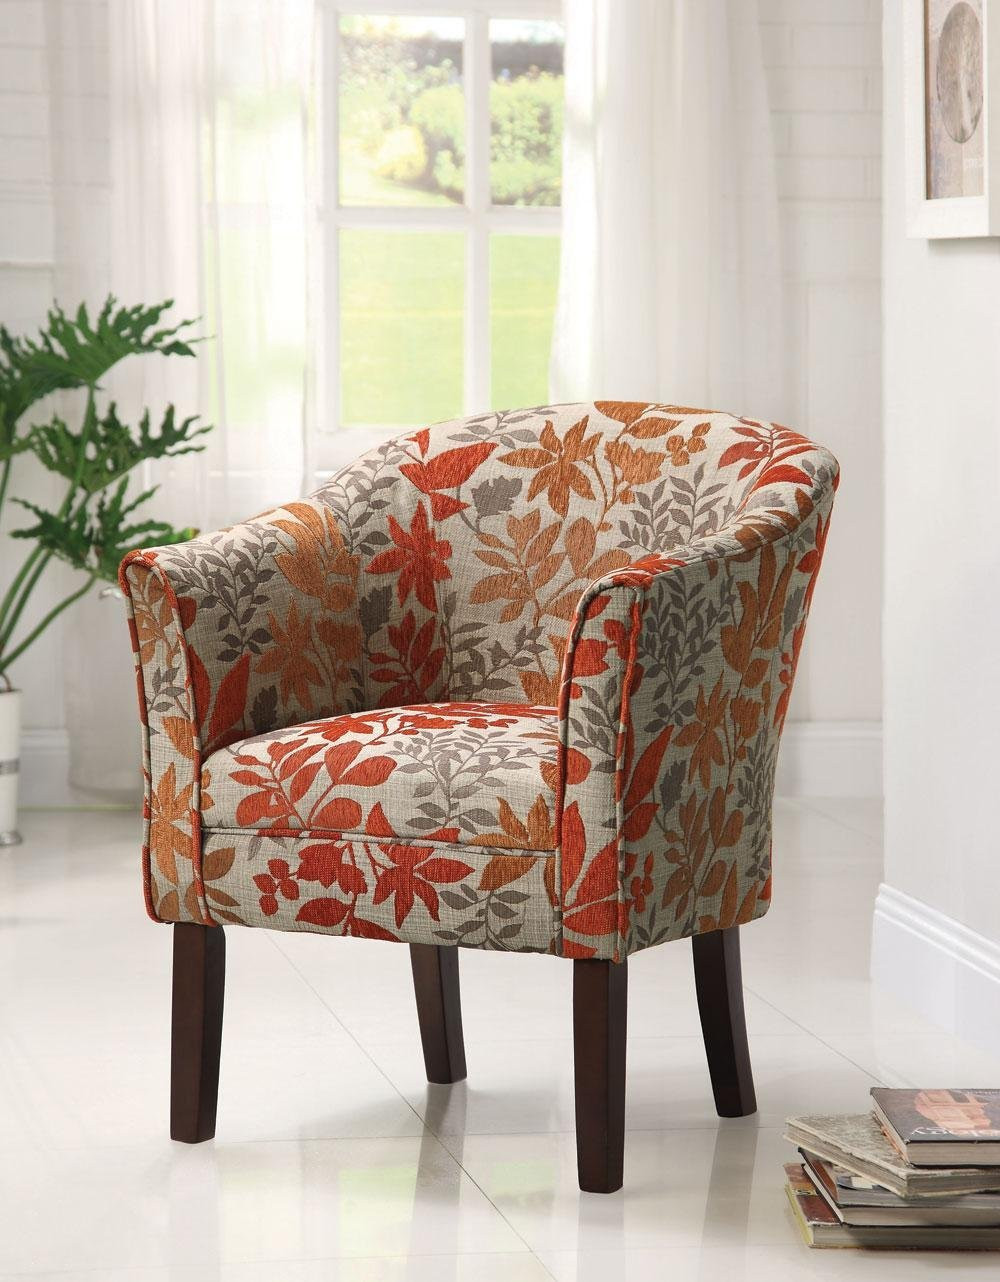 Living Room Furniture Chairs
 Accent chairs for living room 23 reasons to